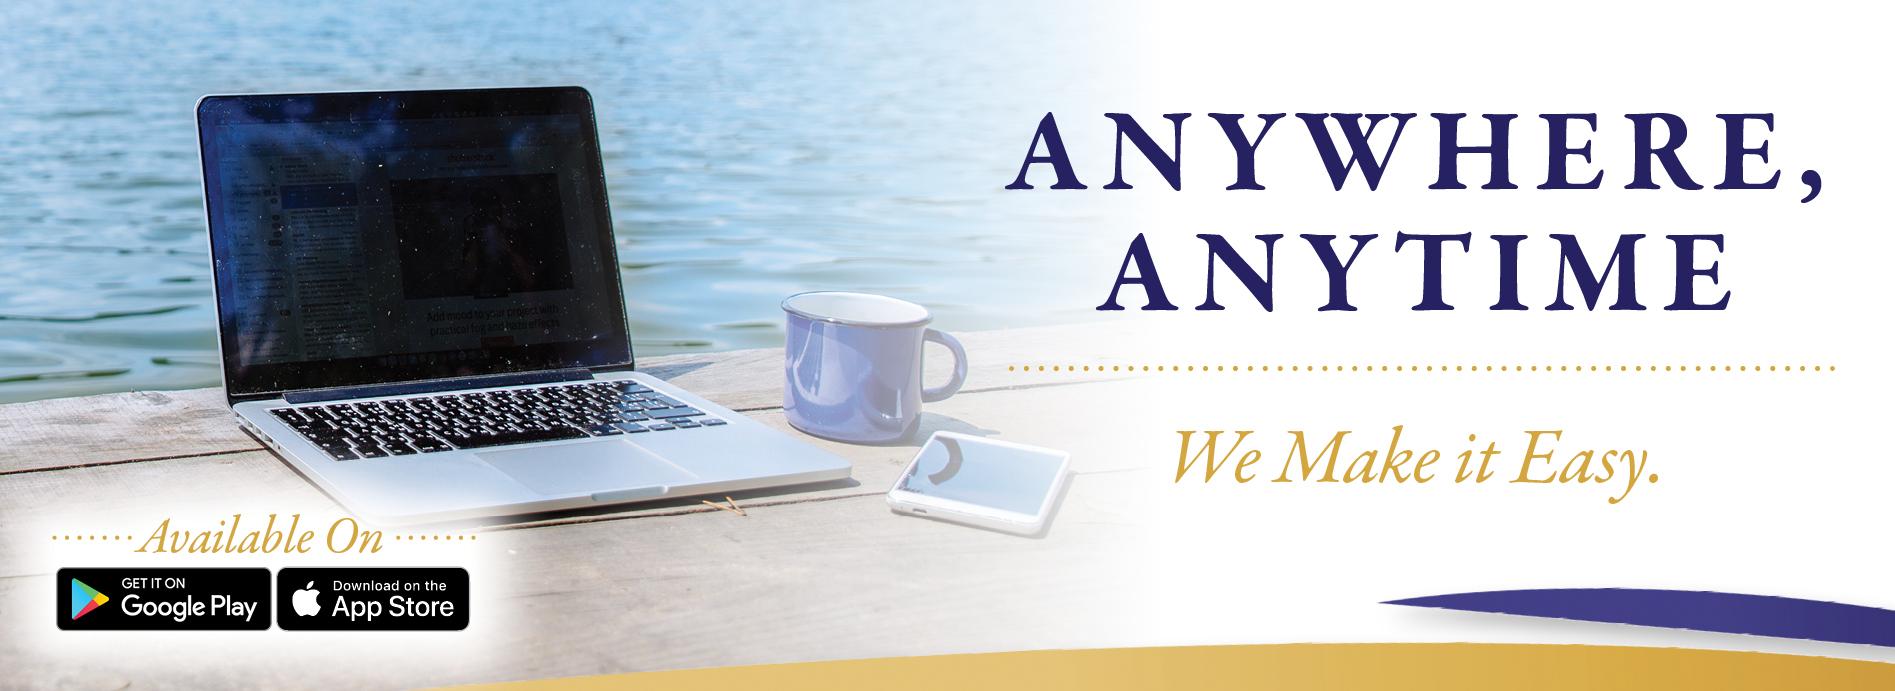 Anywhere, Anytime.  We Make it Easy.  Image of a laptop on a deck on the water.